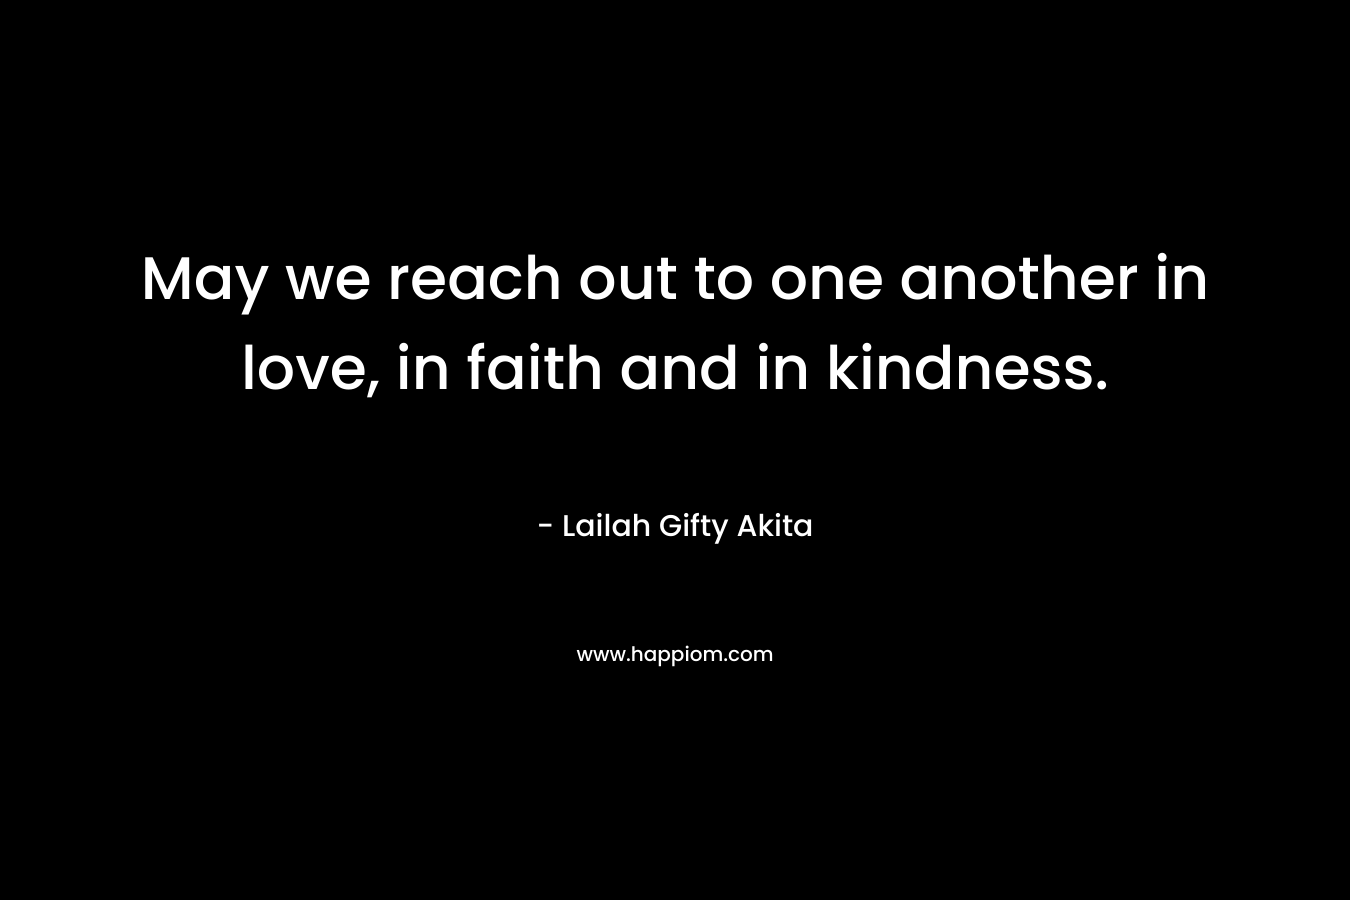 May we reach out to one another in love, in faith and in kindness.